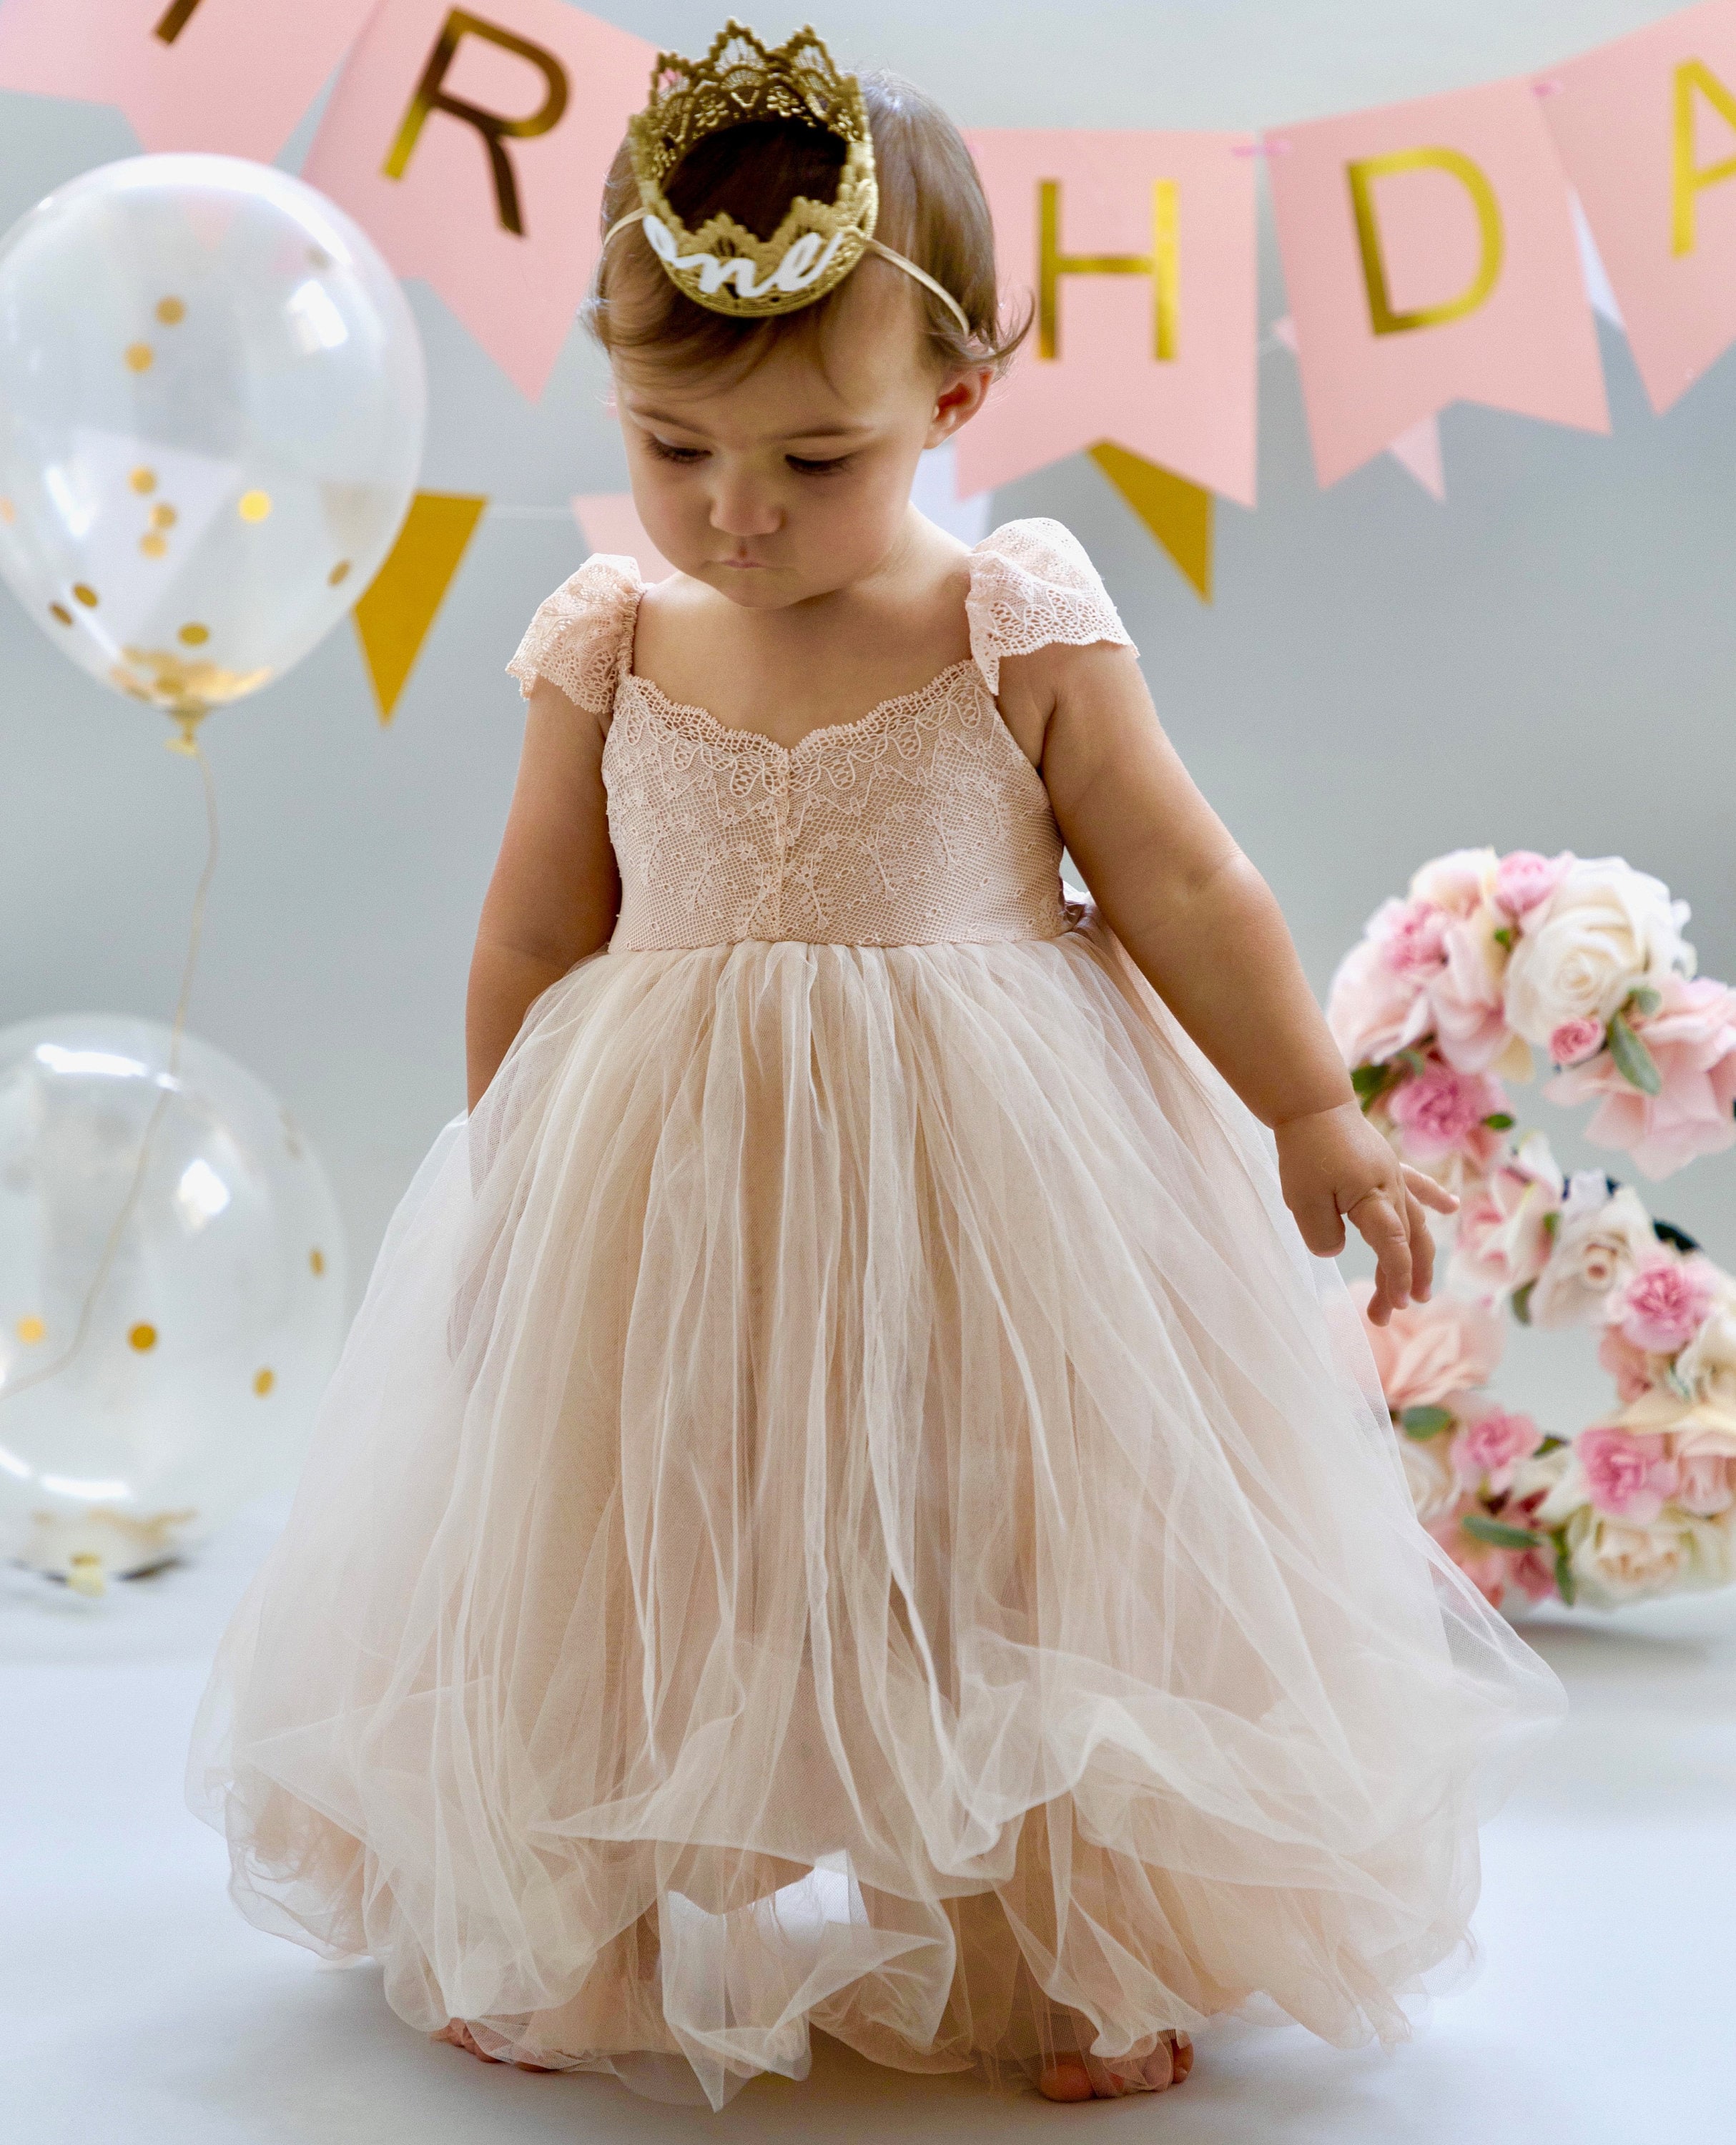 CHAMPAGNE TODDLER FLOWER GIRL DRESS PARTY WEDDING 2/3T 4/4T 5T 6 7 8 10 12 14 16 